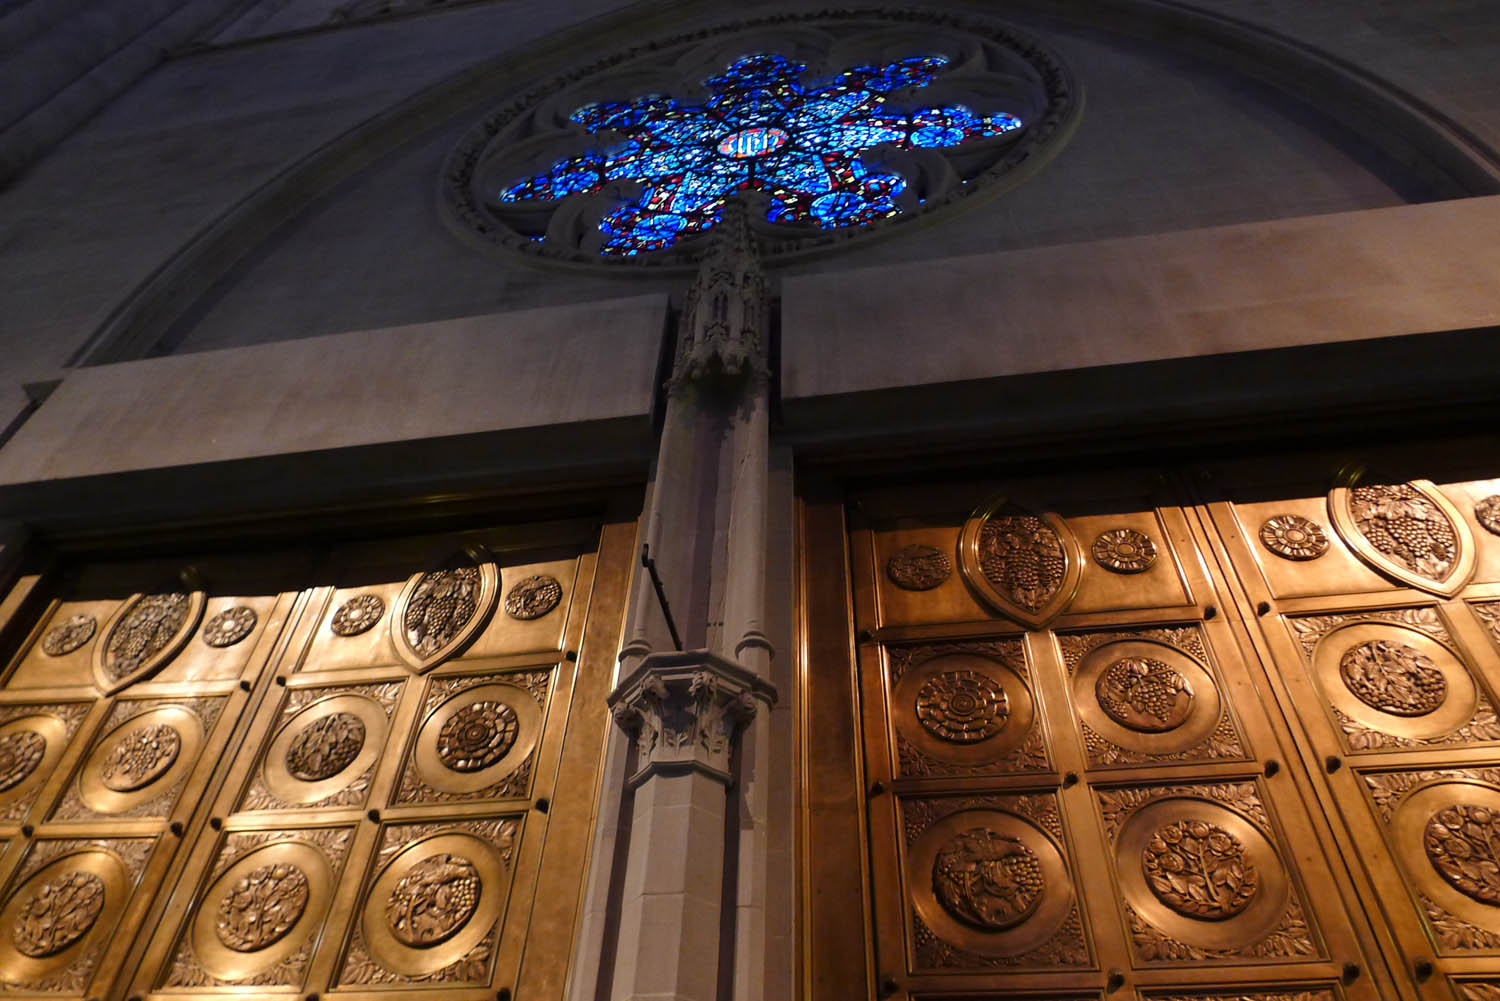 There was also this beautiful stained-glass window above the doorway